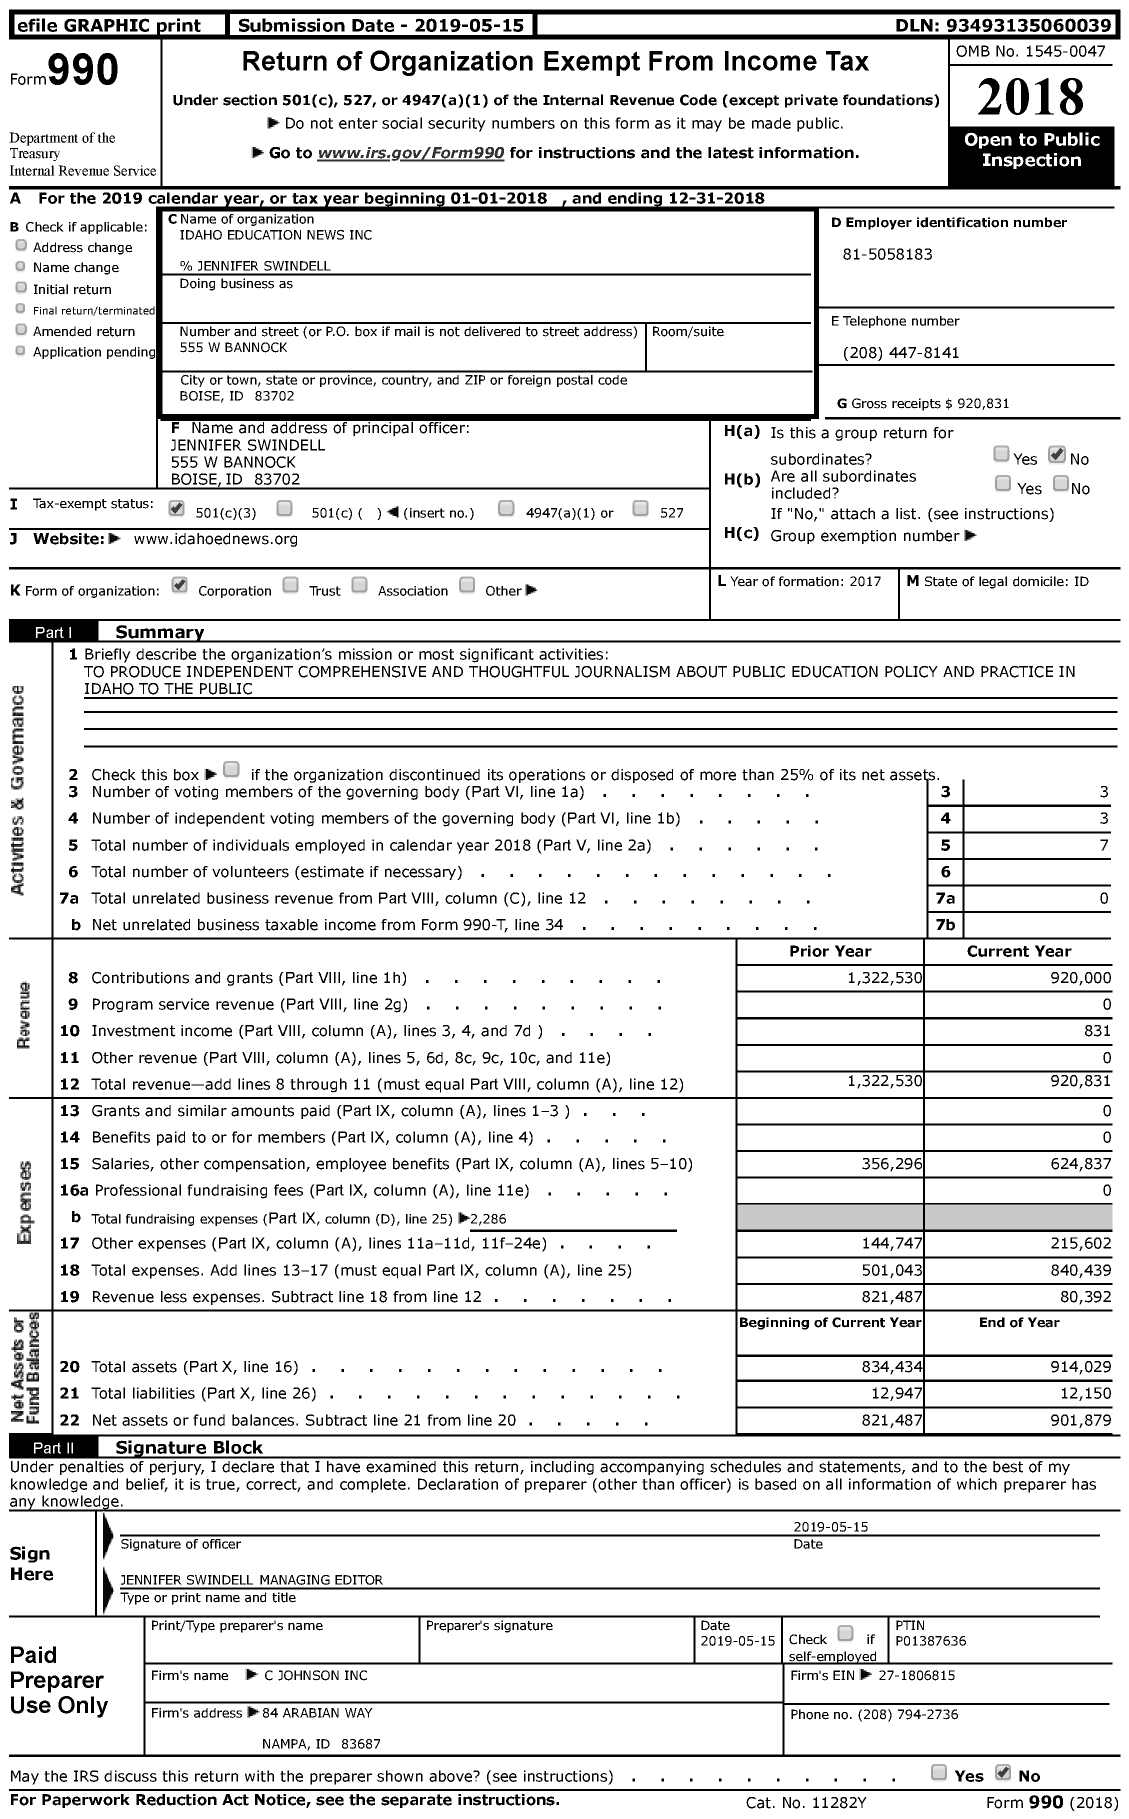 Image of first page of 2018 Form 990 for Idaho Education News